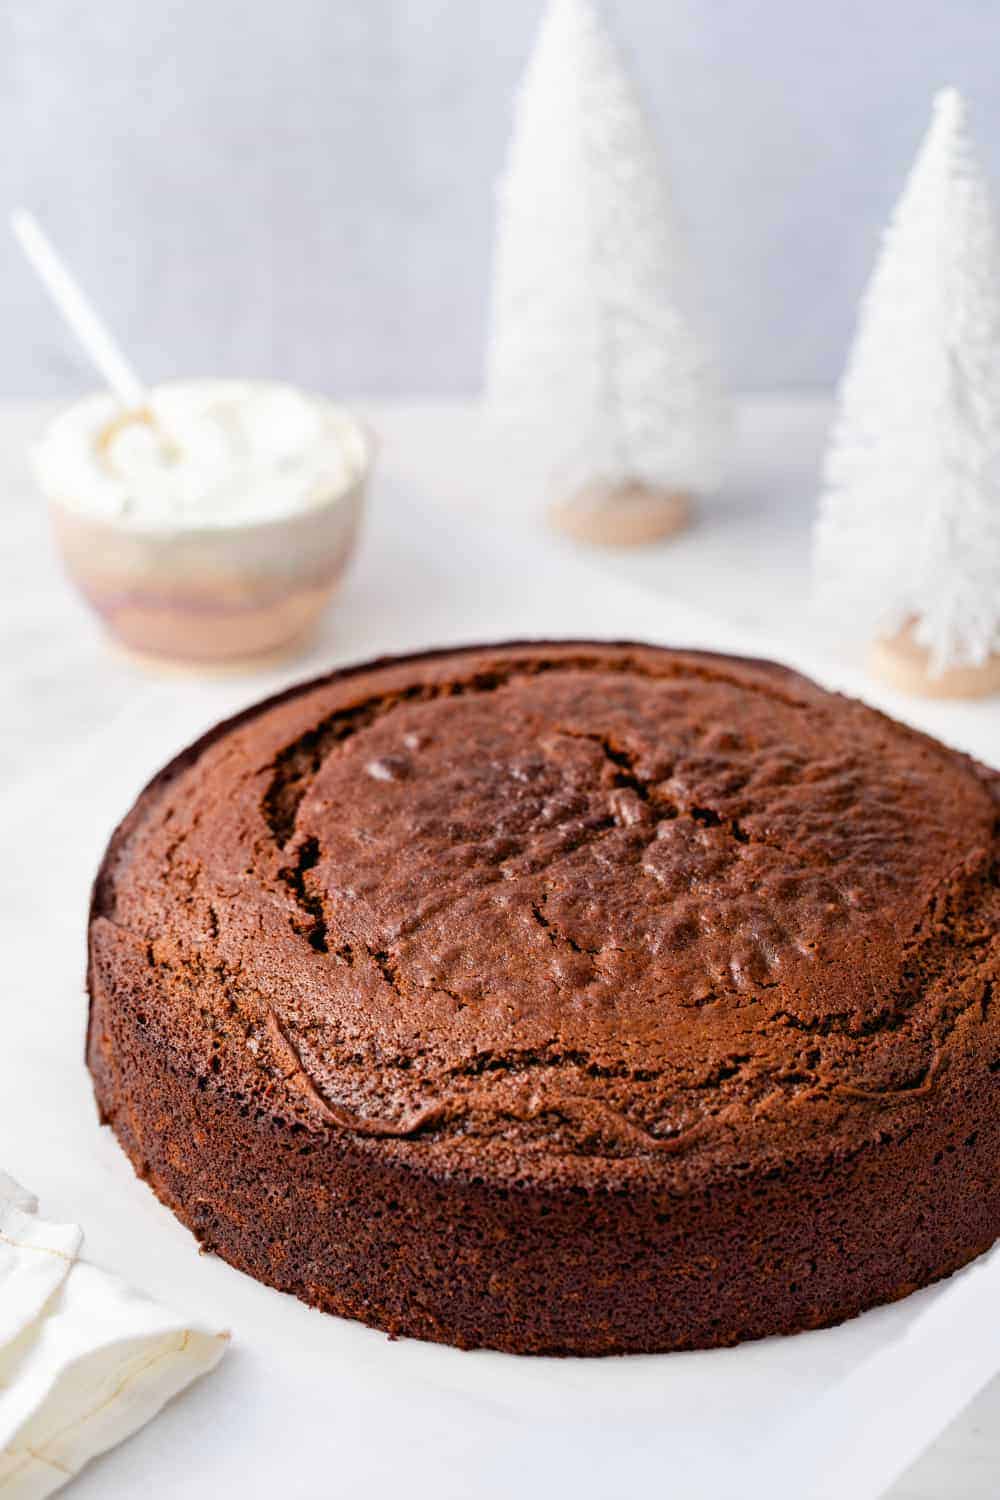 Gingerbread cake on a marble surface with a bowl of whipped cream in the background